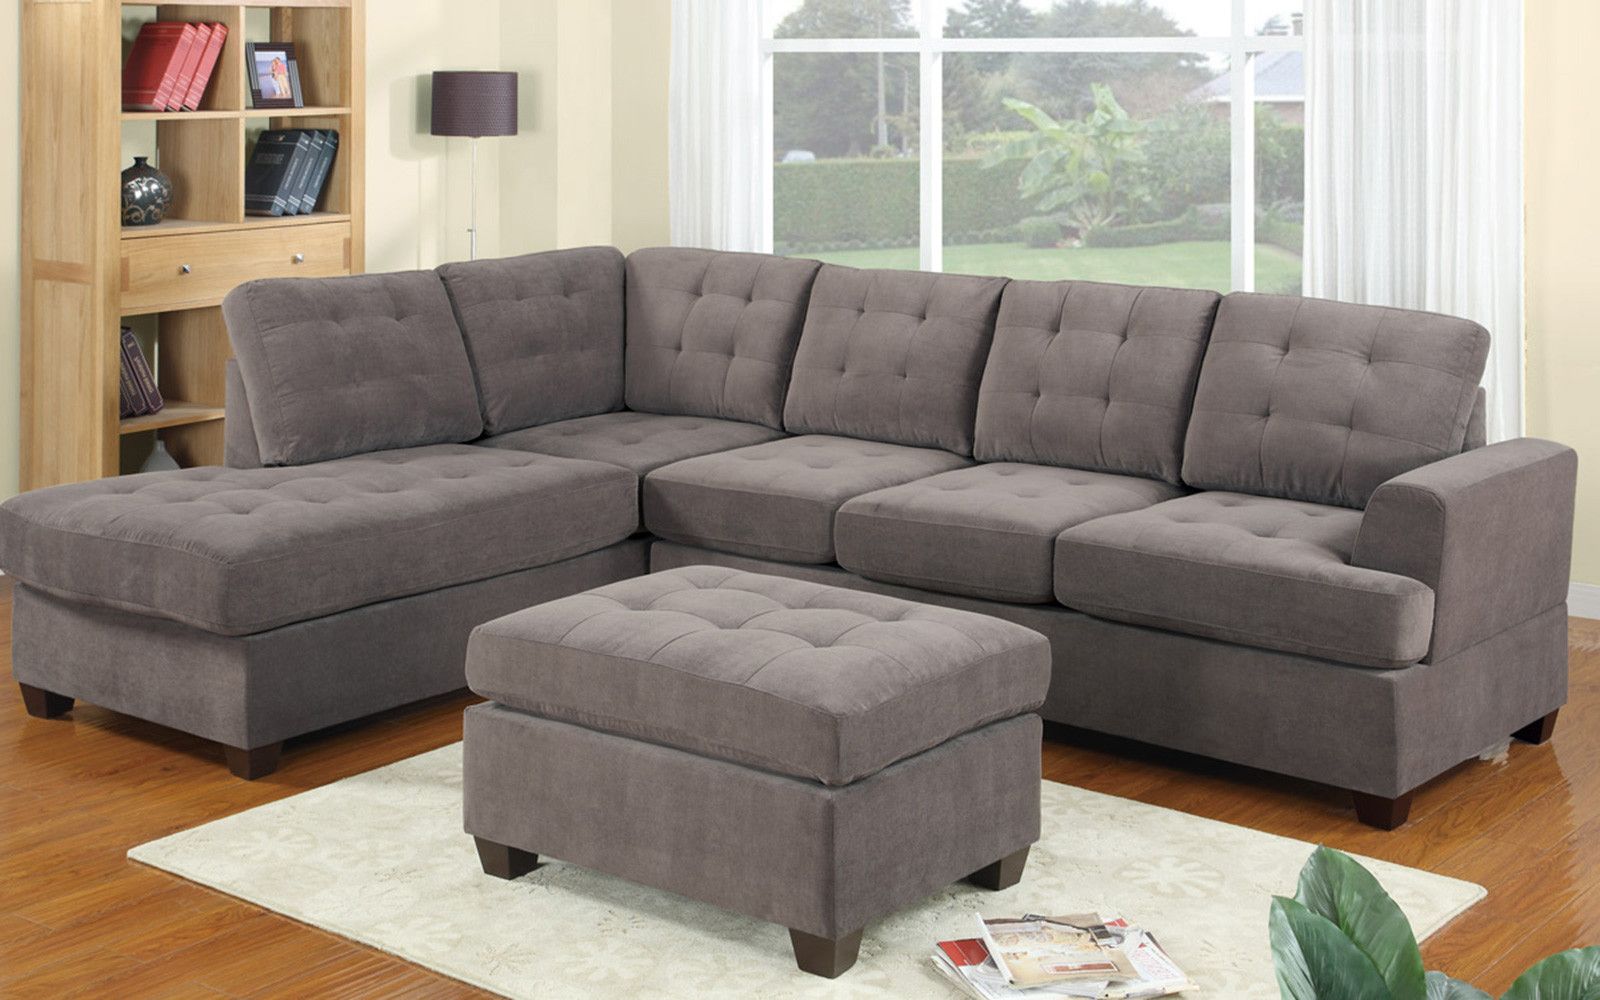 The Beauty Of Microfiber Sectional Sofa – Decorifusta In Microfiber Sectional Corner Sofas (Gallery 13 of 20)